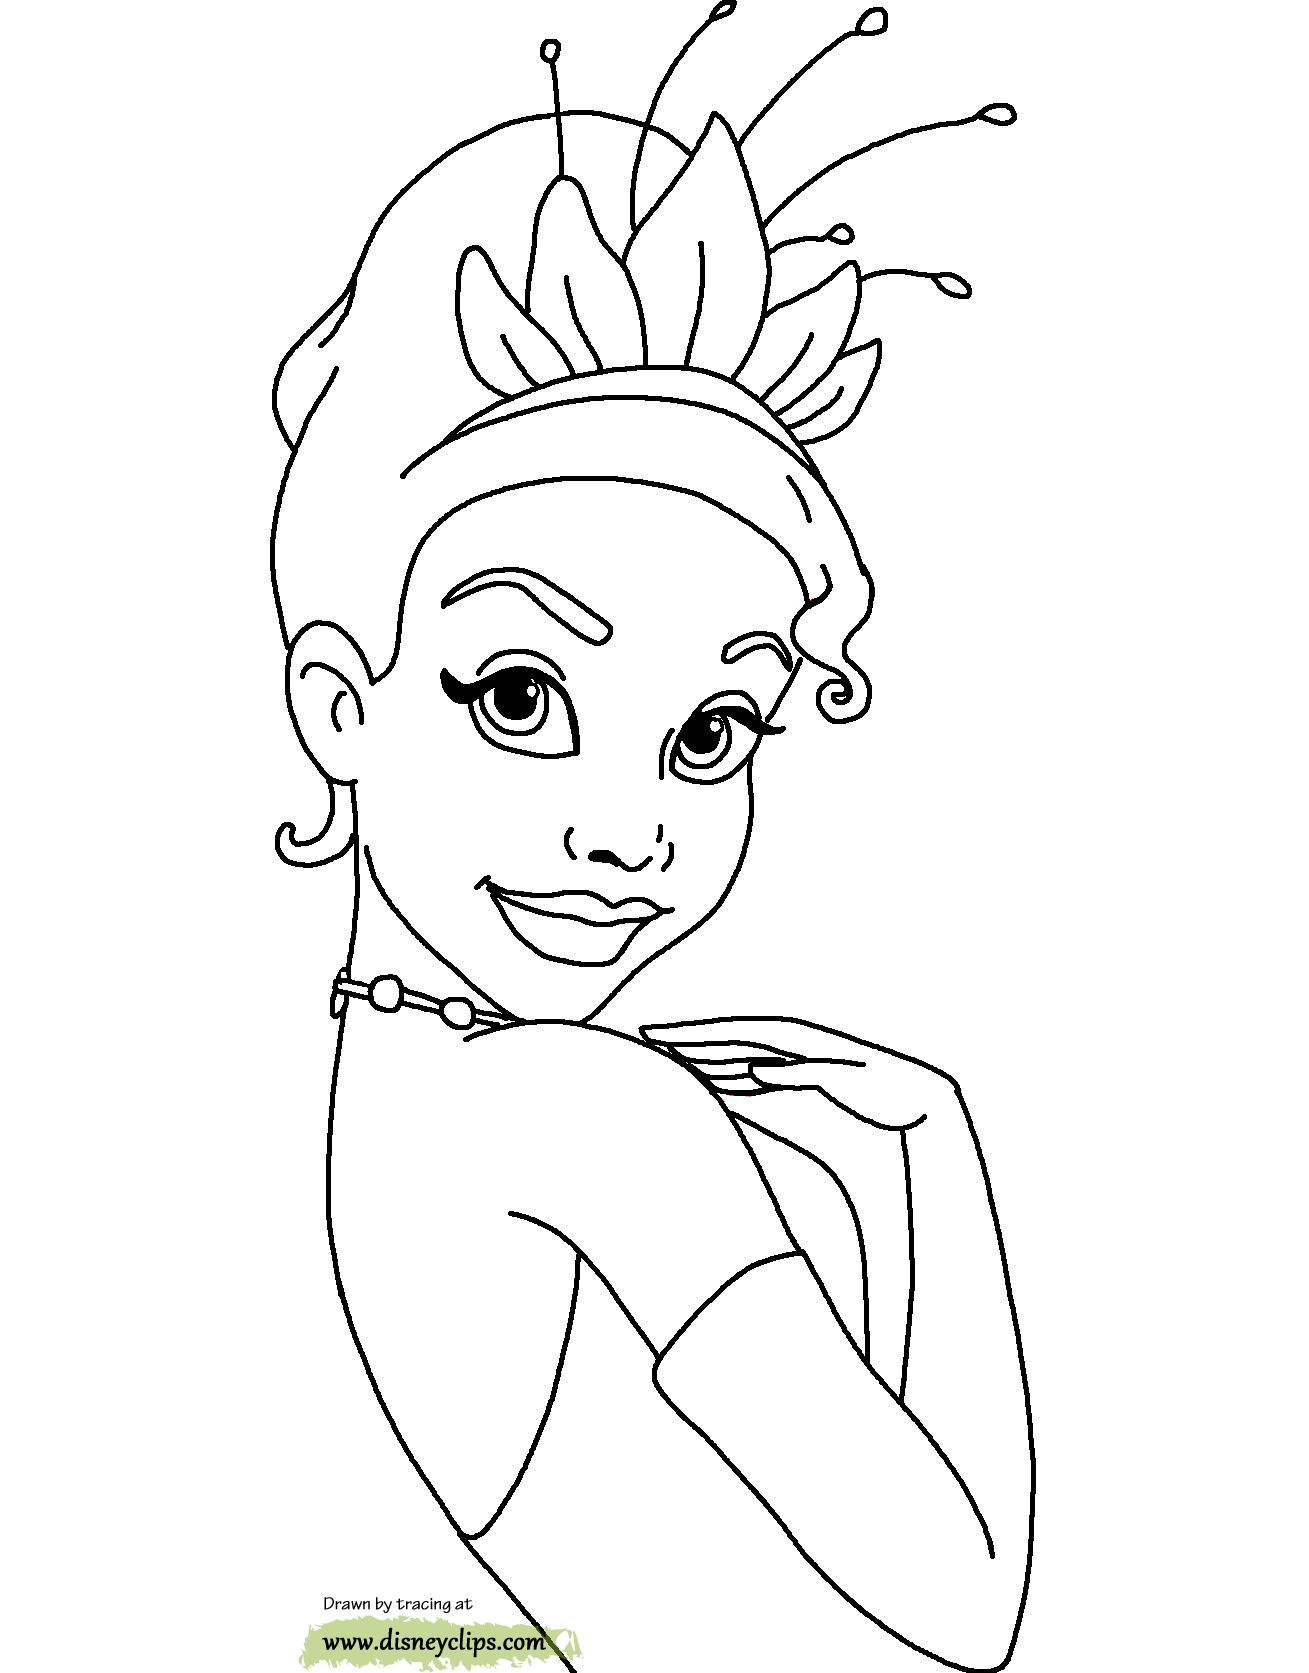 The Princess and the Frog Coloring Pages   Disneyclips.com